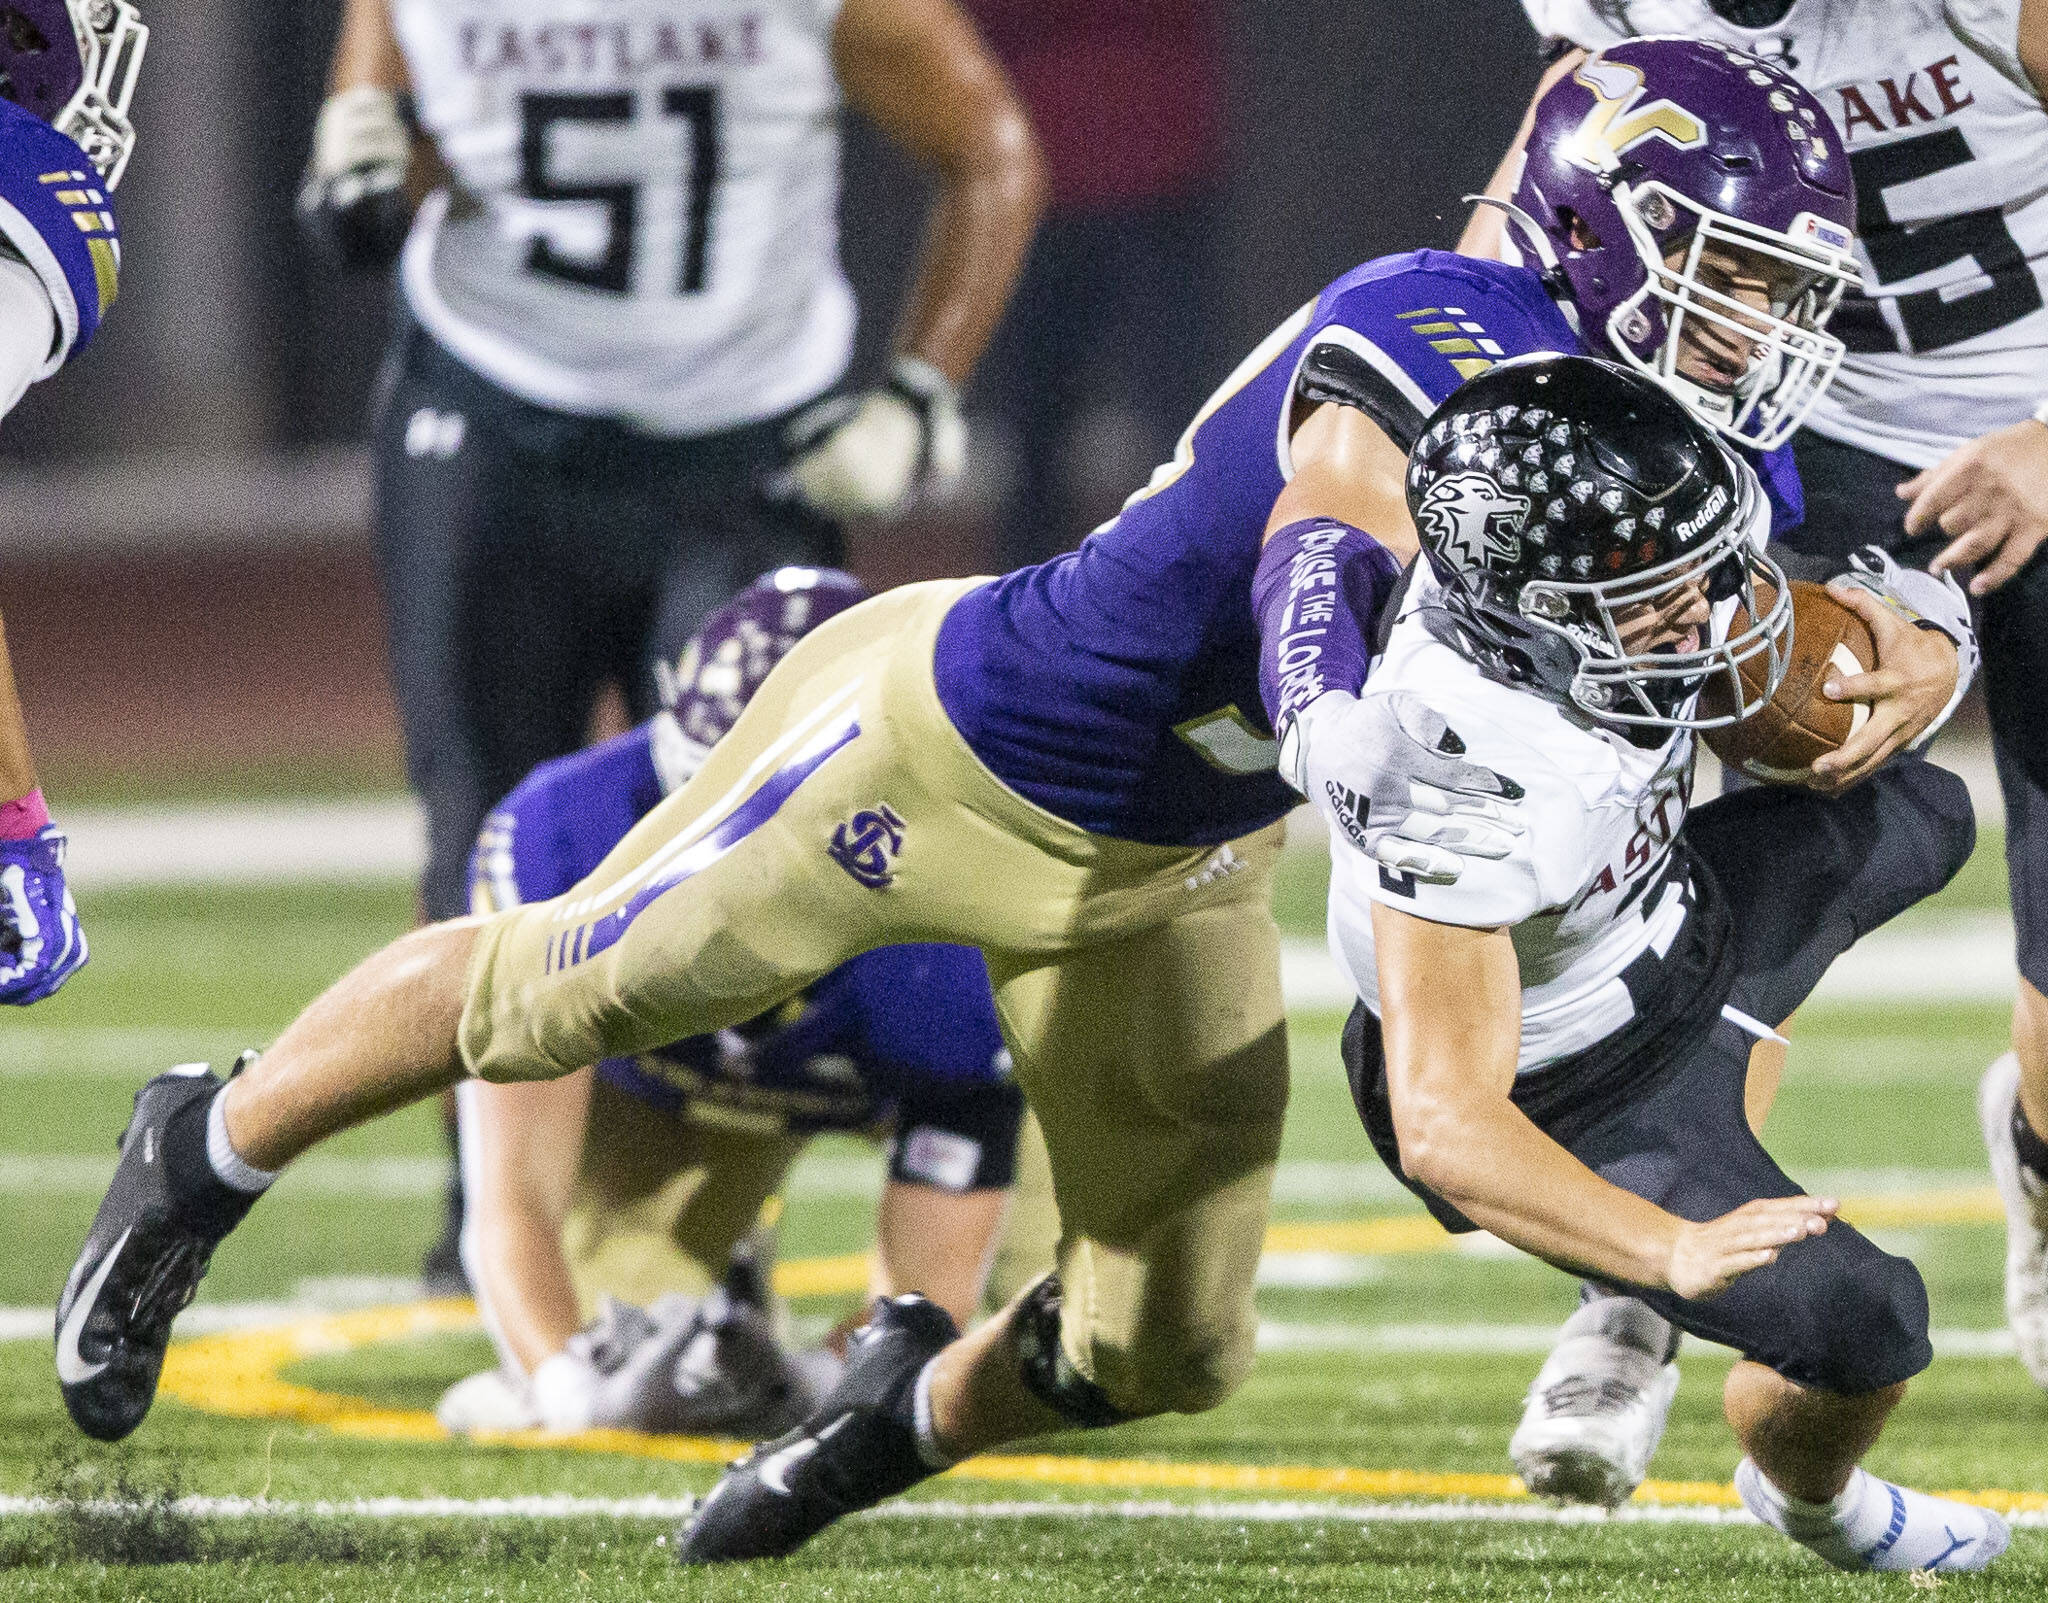 Lake Stevens has allowed just 26 points combined over its past three games. (Olivia Vanni / The Herald)